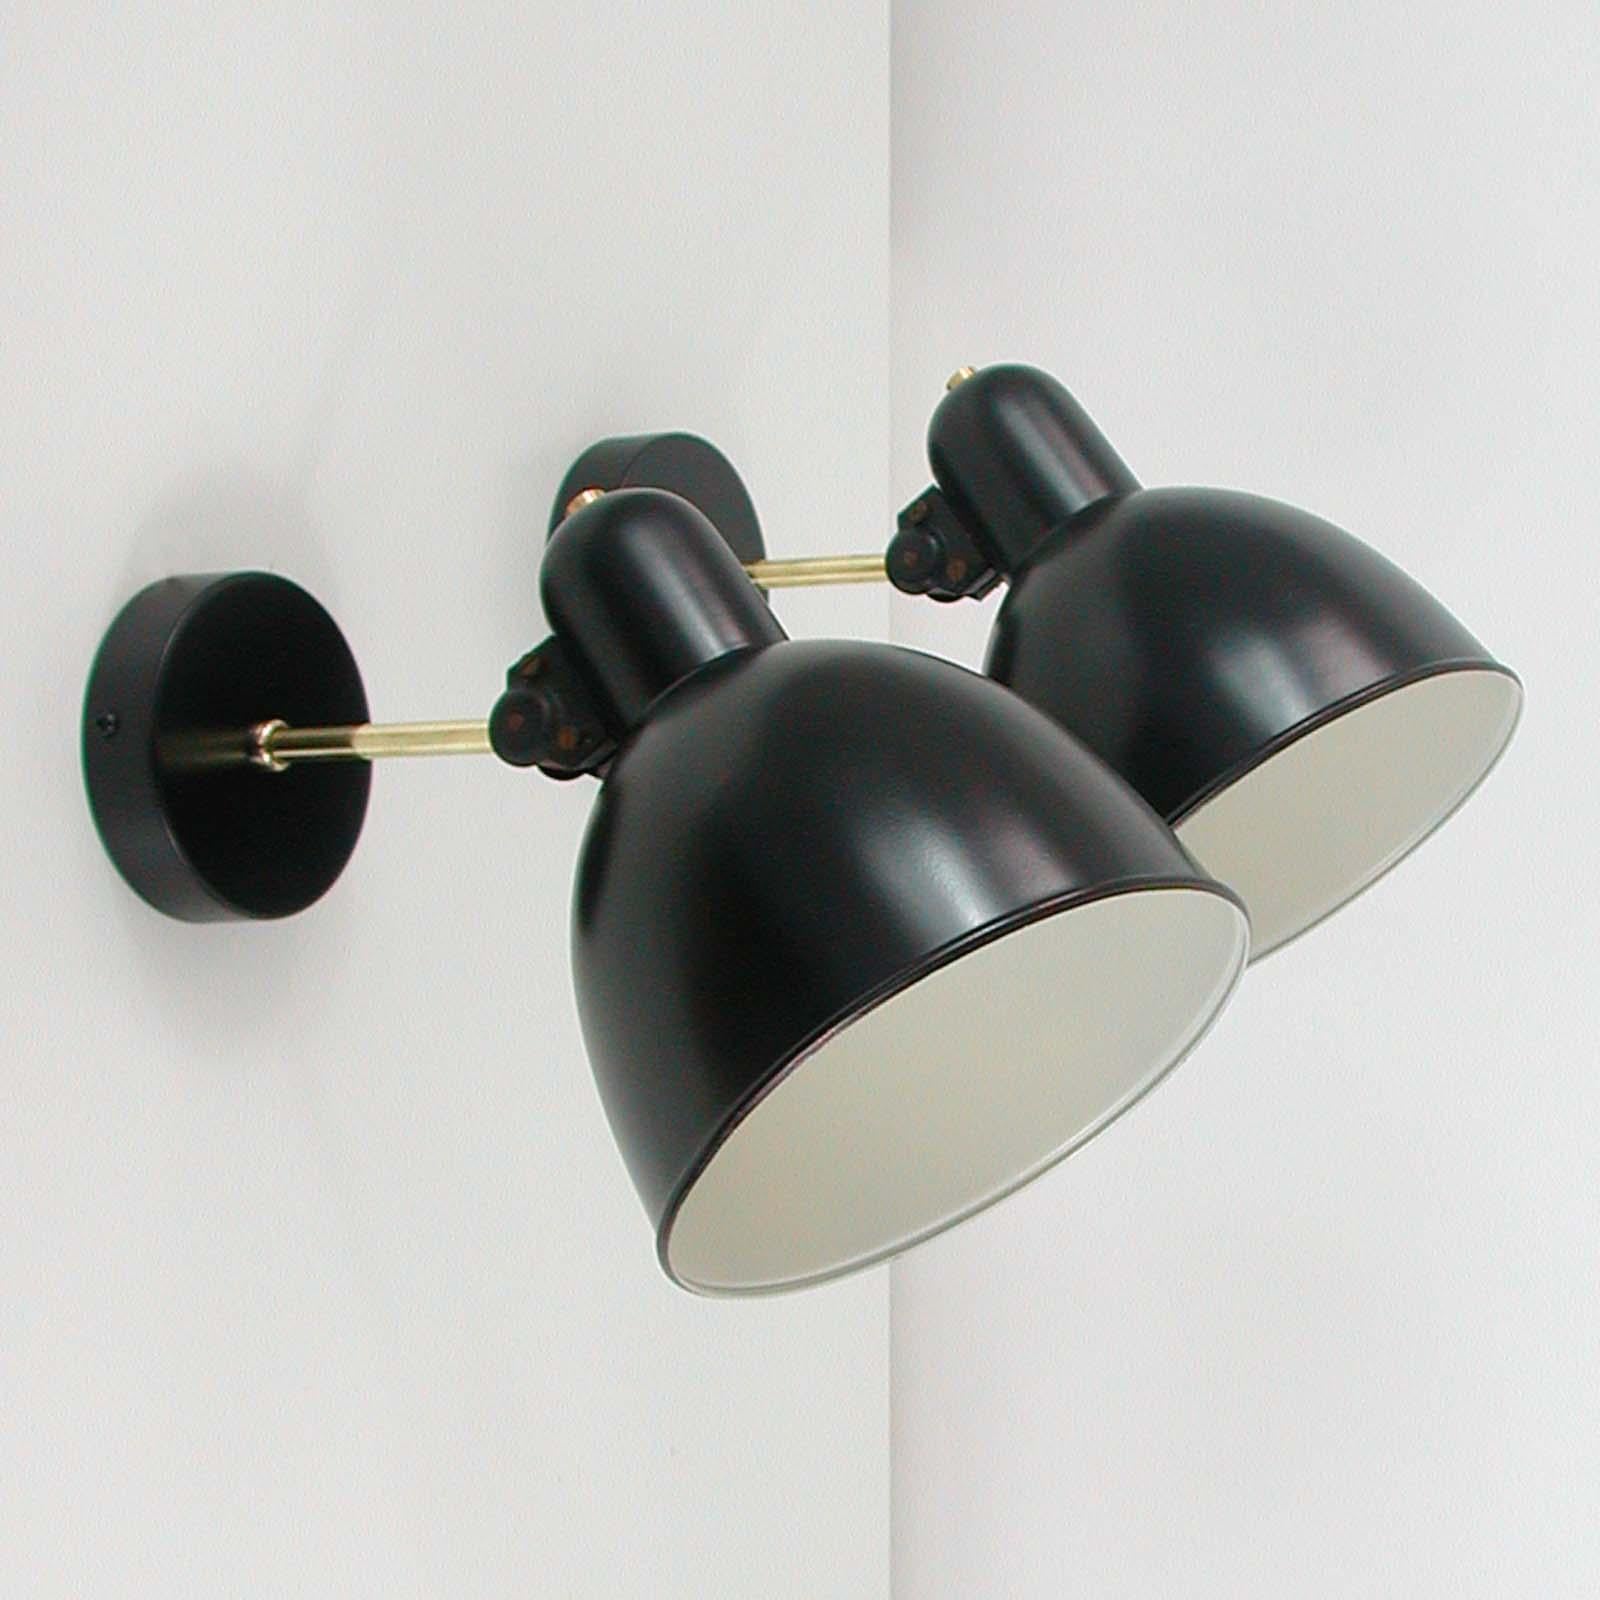 These vintage industrial sconces were manufactured in Germany in the 1930s. They feature a black lacquered metal lampshade, a black back plate and a brass lamp arm. The lamp shades are adjustable. The lamp arm is customizable. 

The design is